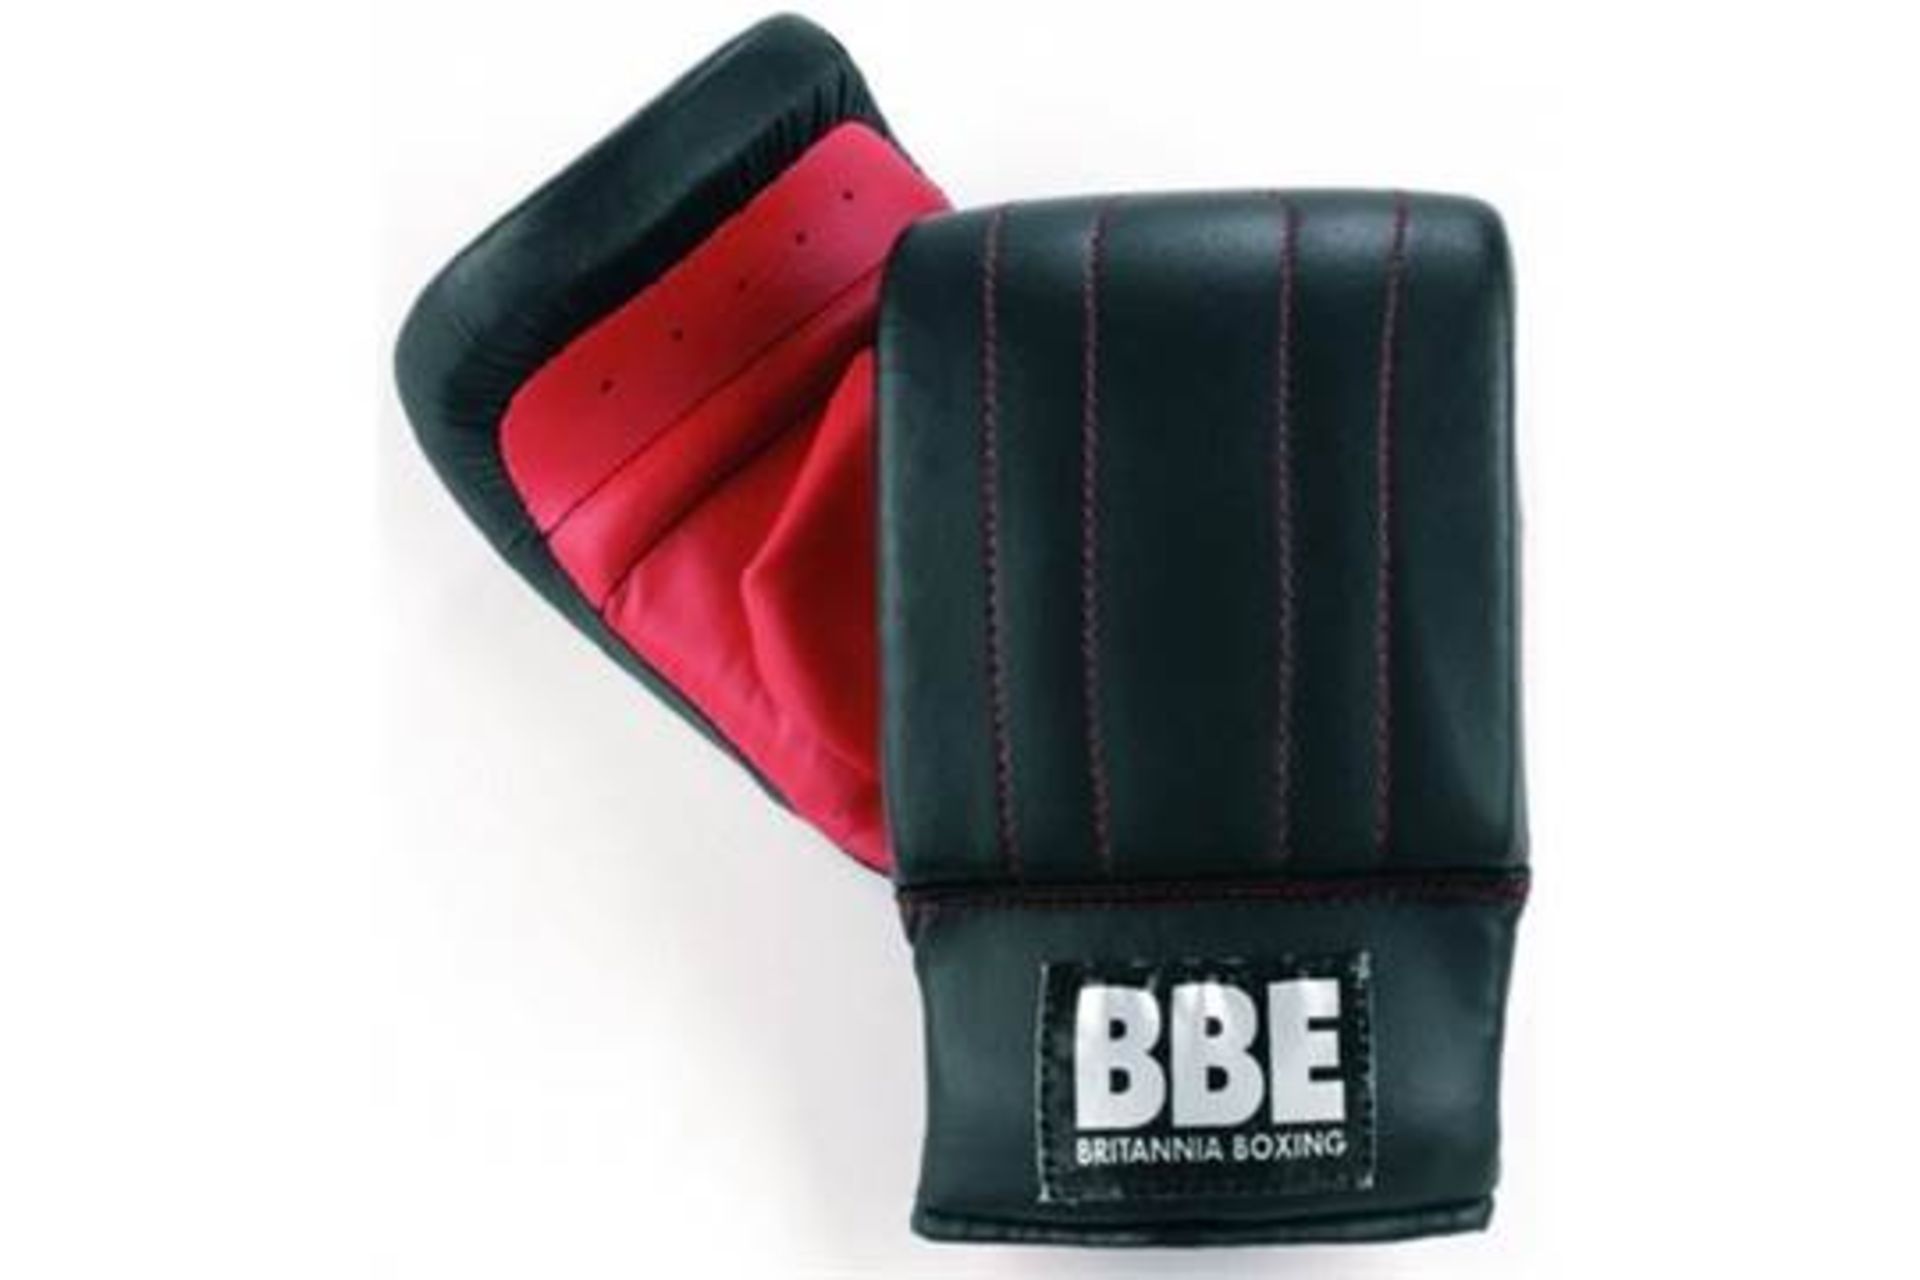 2 x Boxes of BBE Boxing Gloves - 40 pairs per box